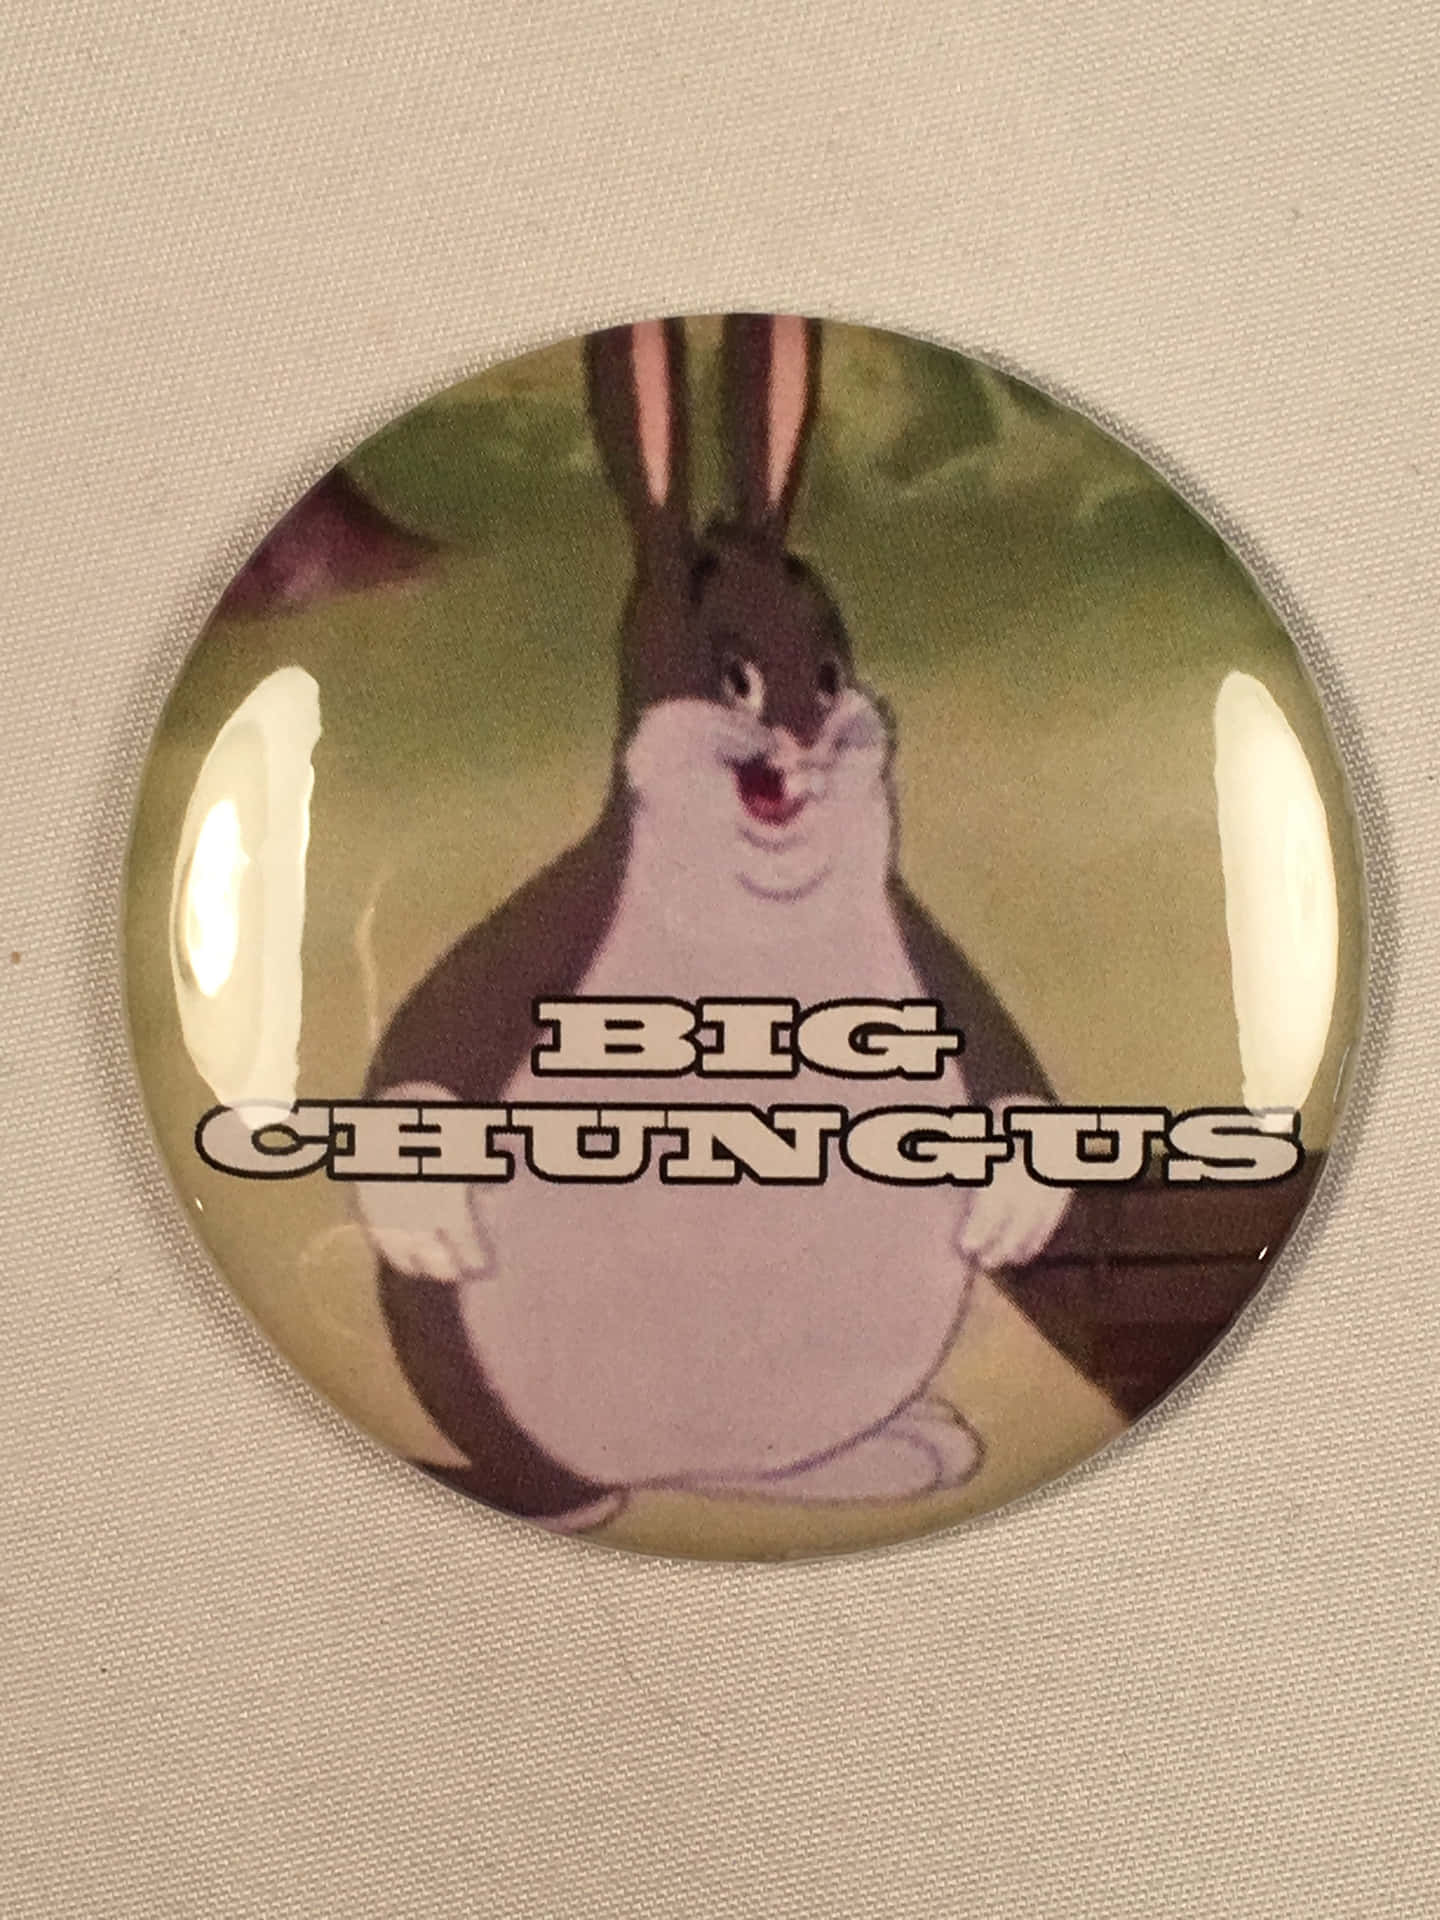 Join The Big Chungus Craze And Feel The Power!